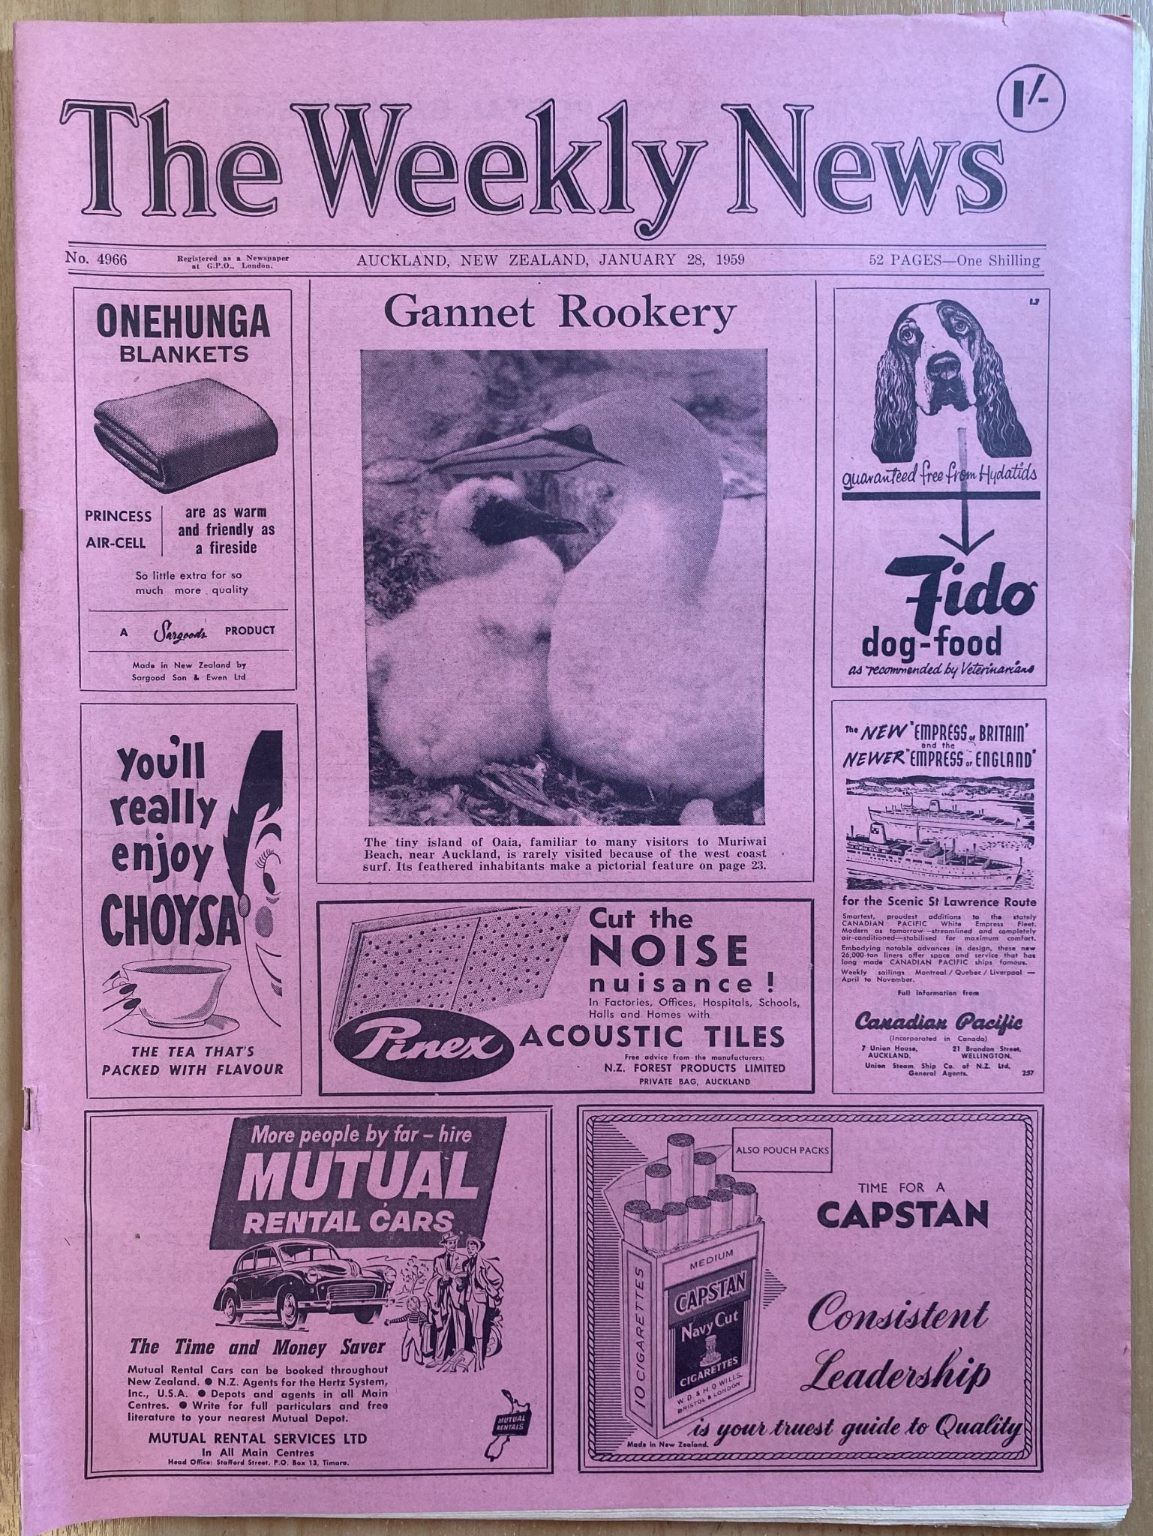 OLD NEWSPAPER: The Weekly News - No. 4966, 28 January 1959